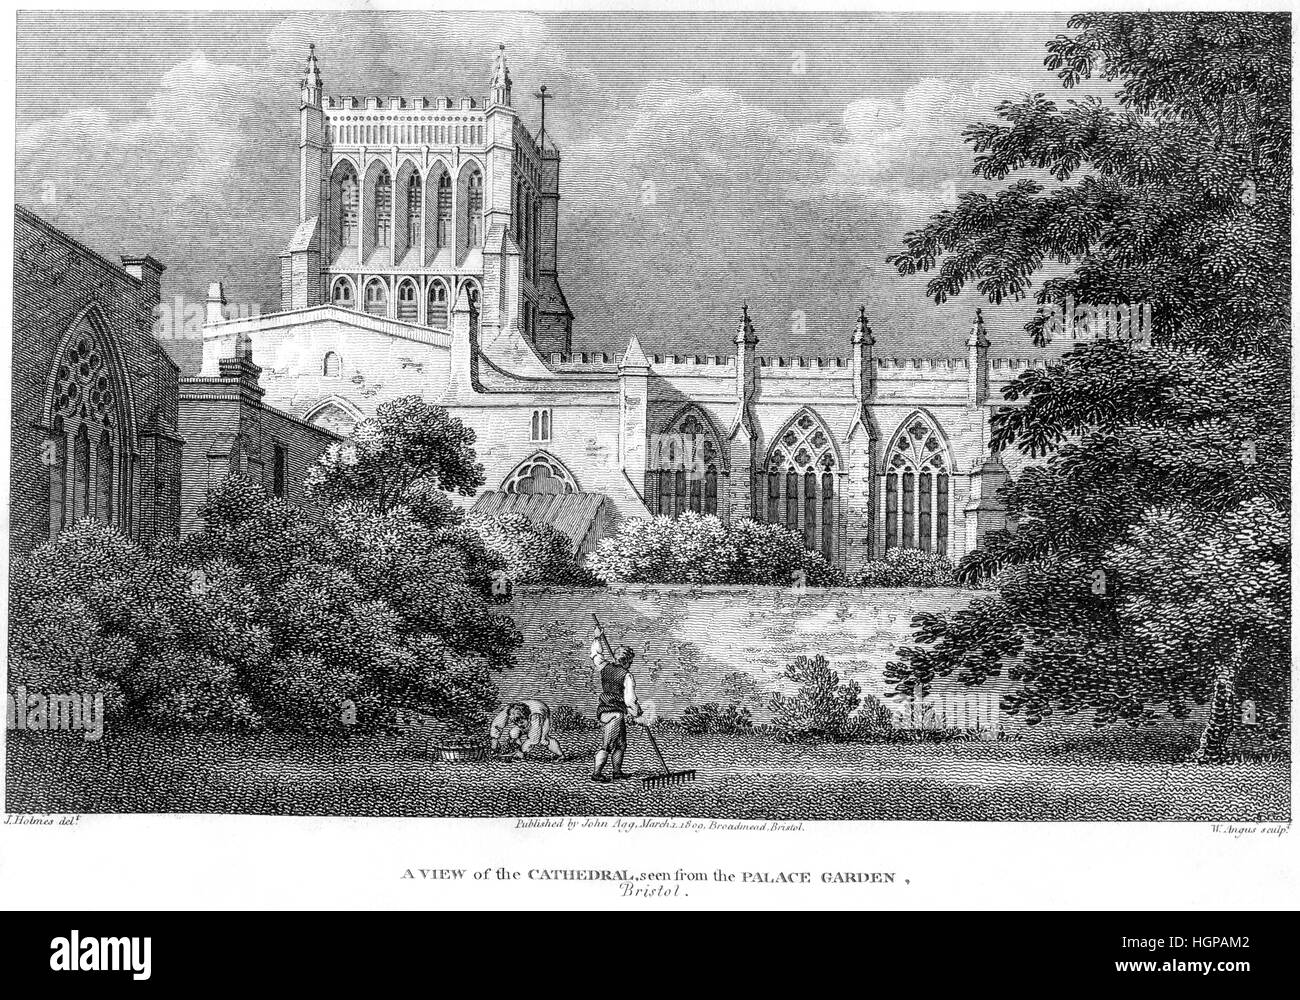 An engraving of A View of the Cathedral seen from the Palace Garden, Bristol in 1809 scanned at high resolution from a book printed in 1816. Stock Photo